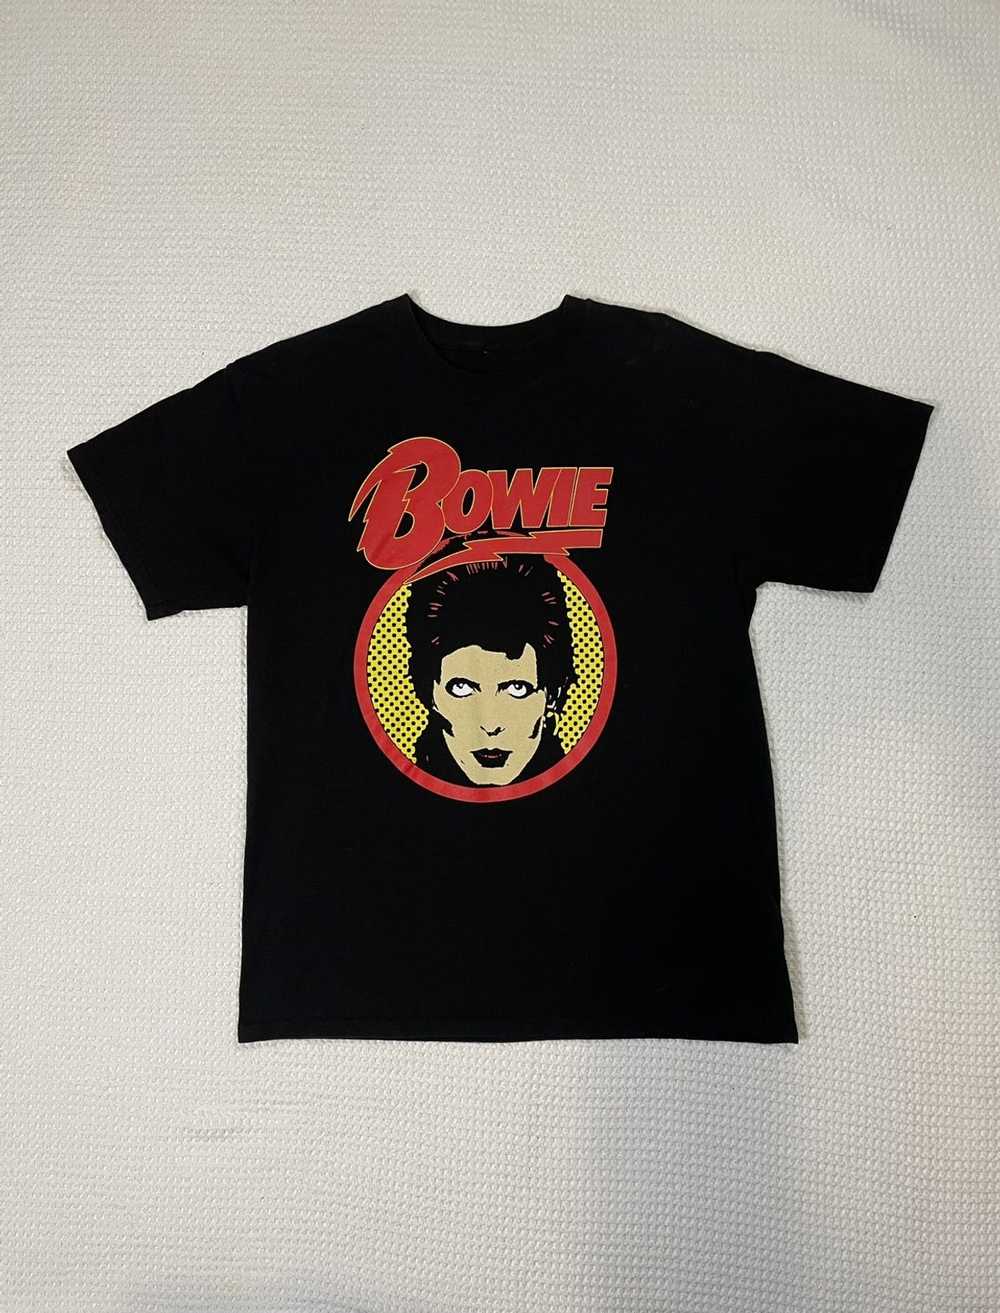 Vintage Early 2000s David Bowie tee - image 2